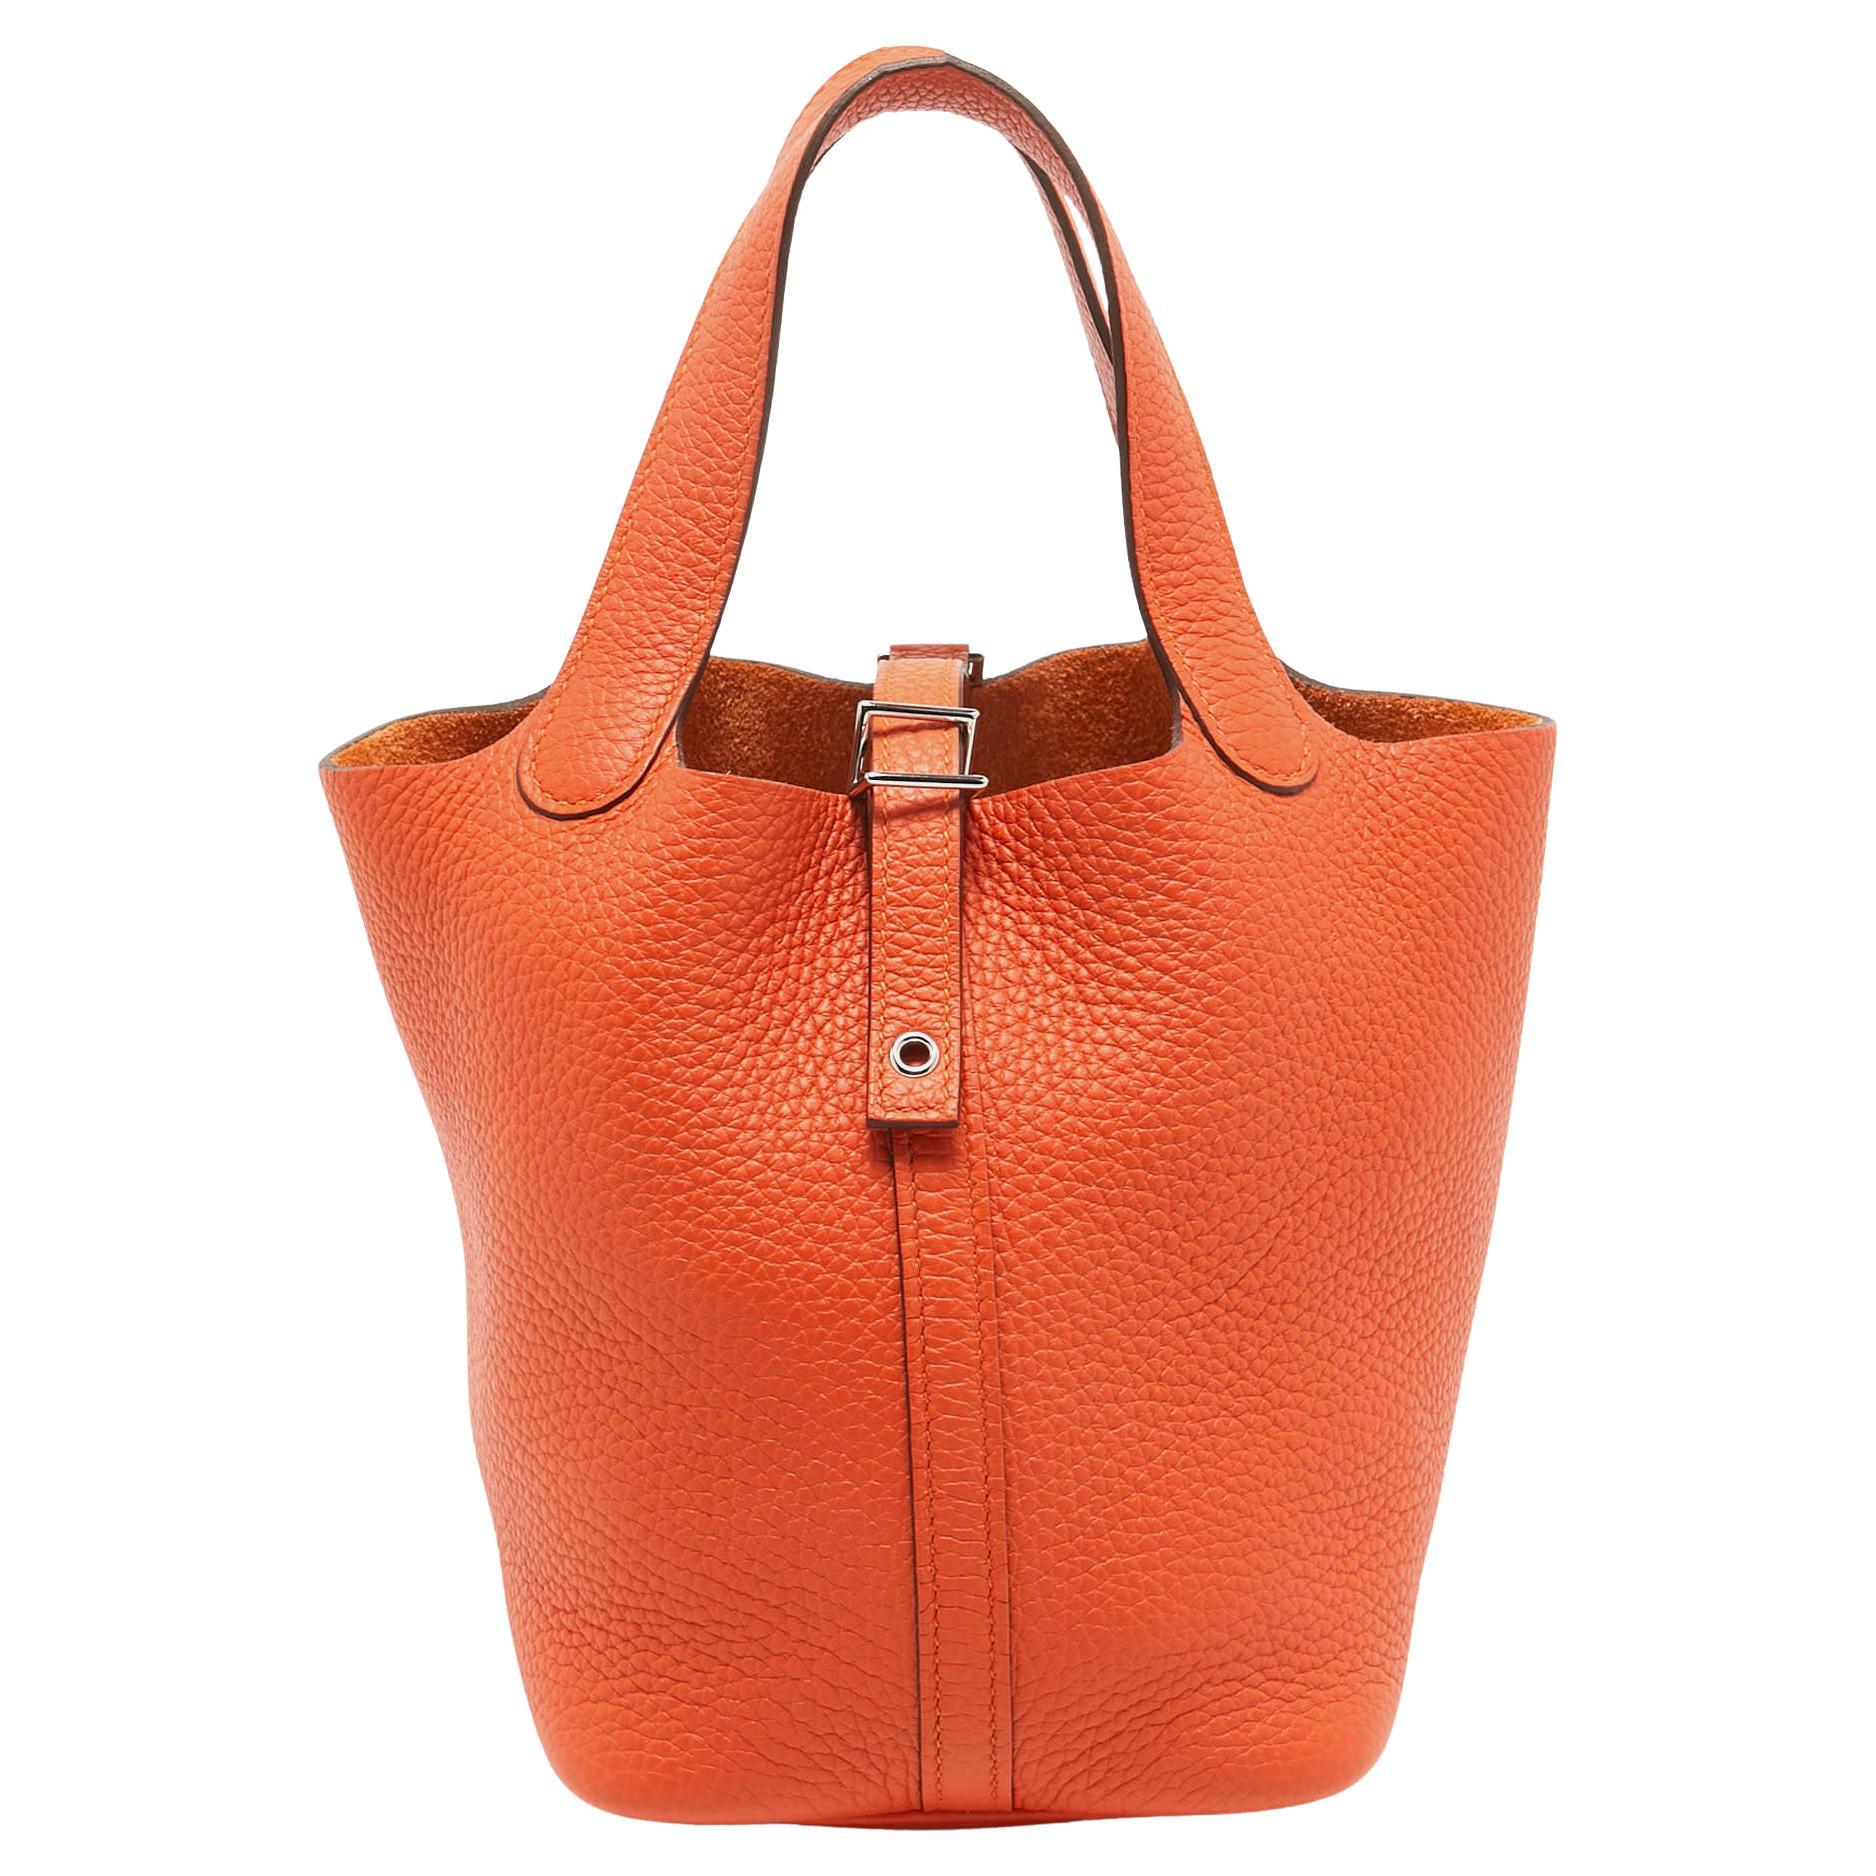 Hermes Feu Taurillon Clemence Leather Picotin Lock 18 Bag For Sale